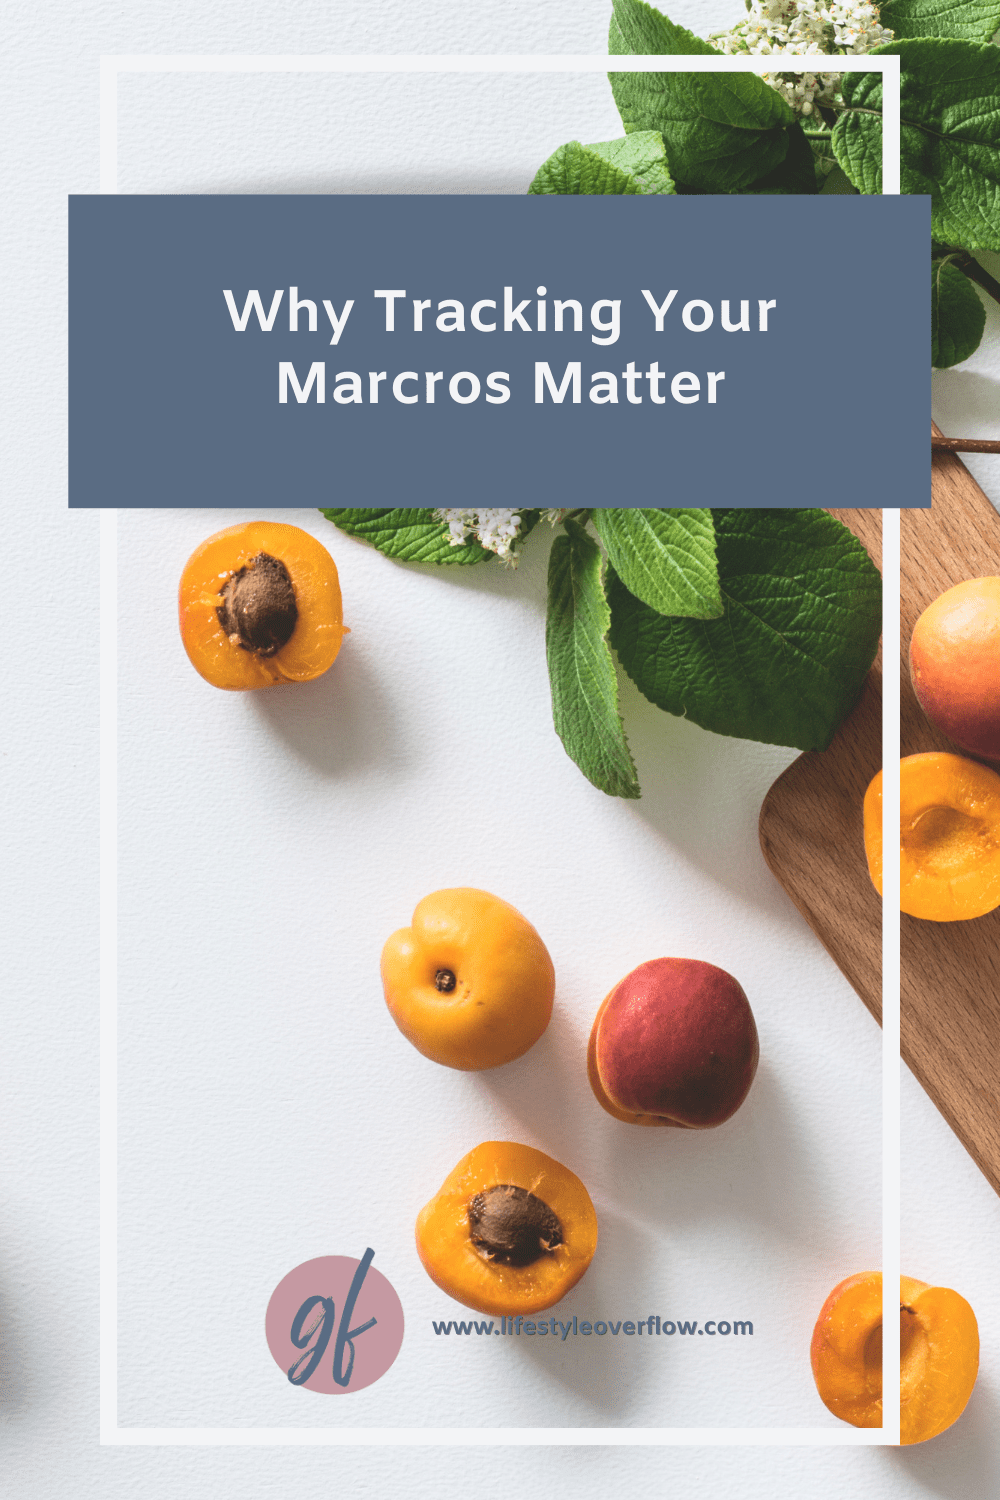 why tracking your macros matter by Gina Forcatto | www.lifestyleoverflow.com